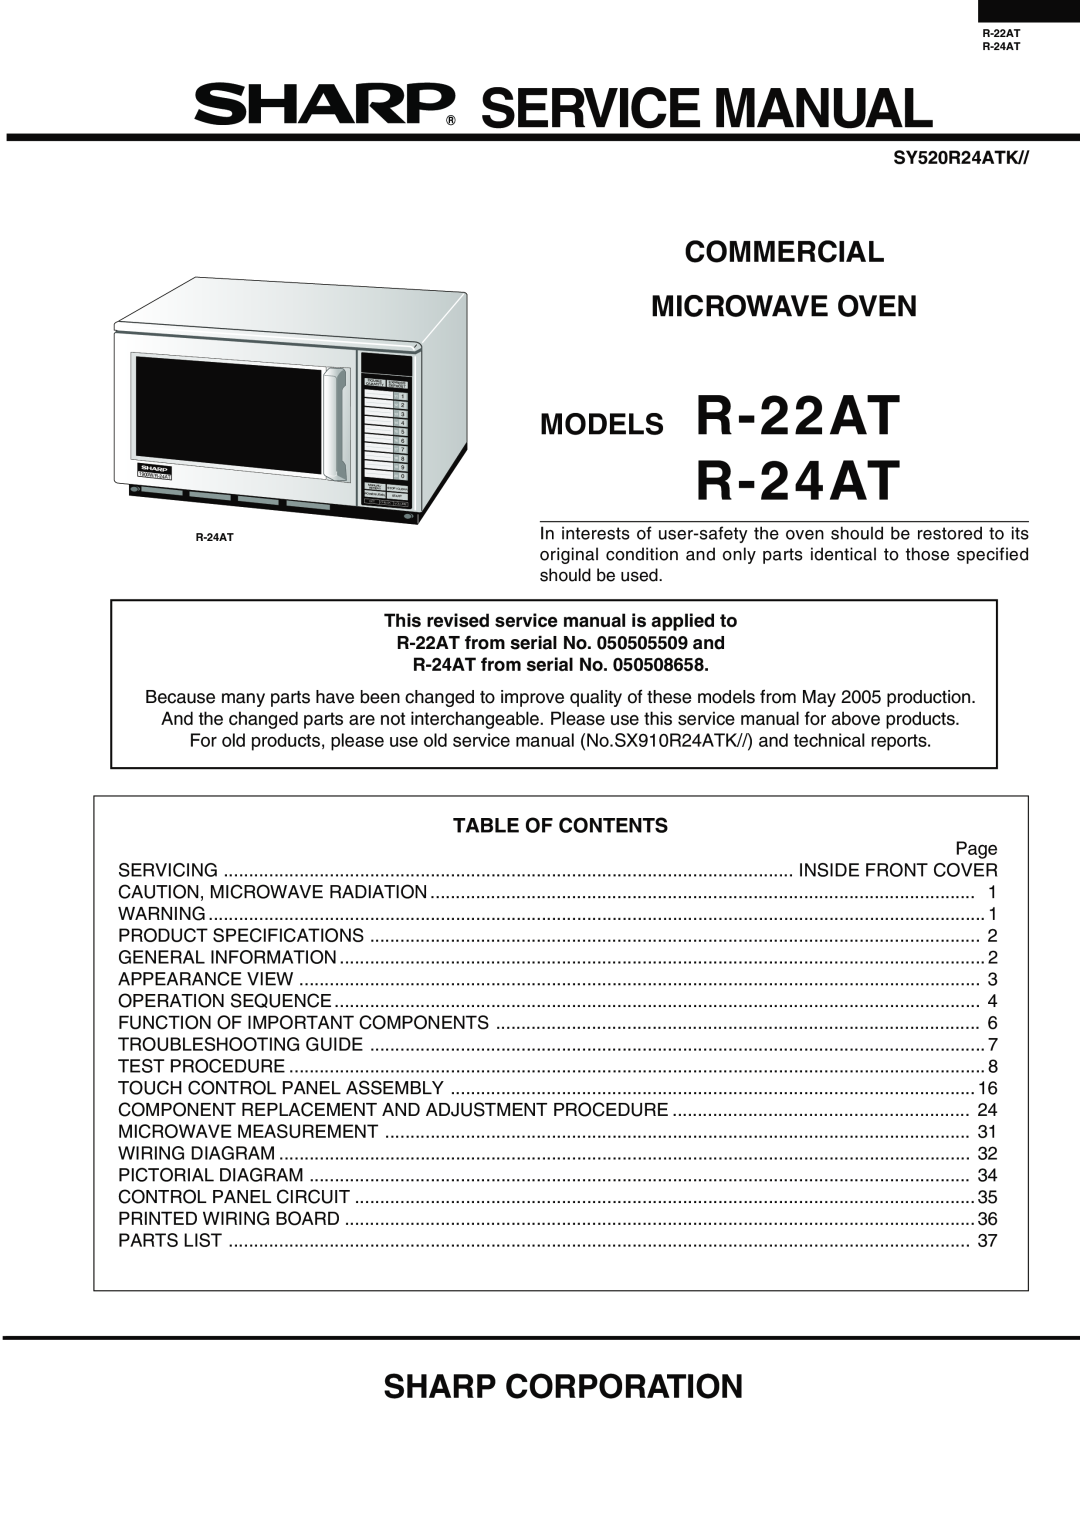 Sharp operation manual Intelligent Thinking, R-24AT R-22AT, Commercial Microwave Oven Operation Manual, Models 